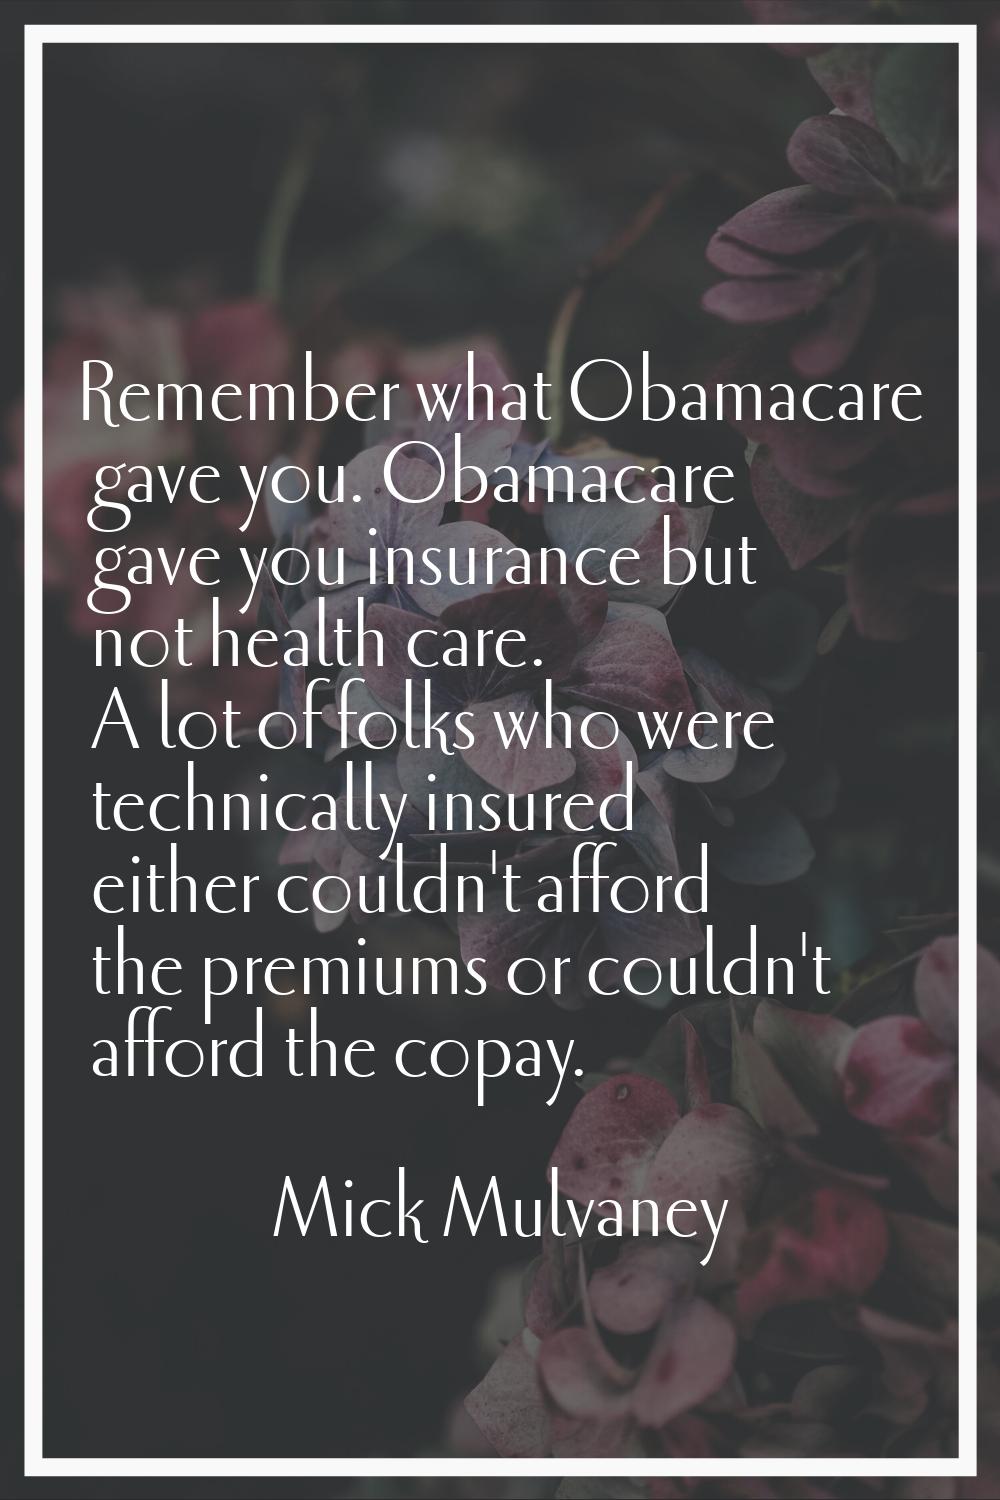 Remember what Obamacare gave you. Obamacare gave you insurance but not health care. A lot of folks 